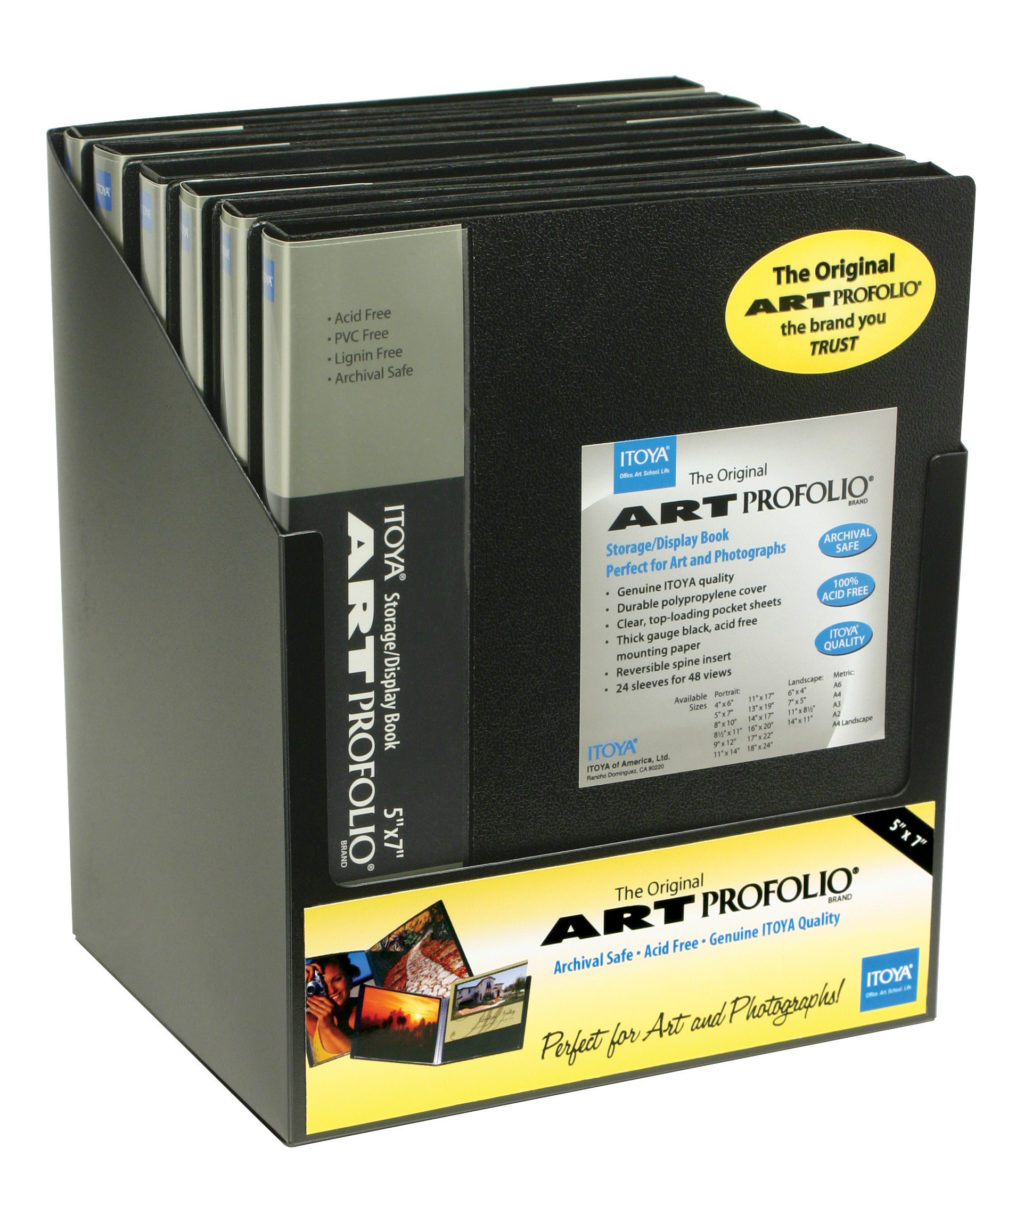 Viewpoint Archival Storage Box 12x12